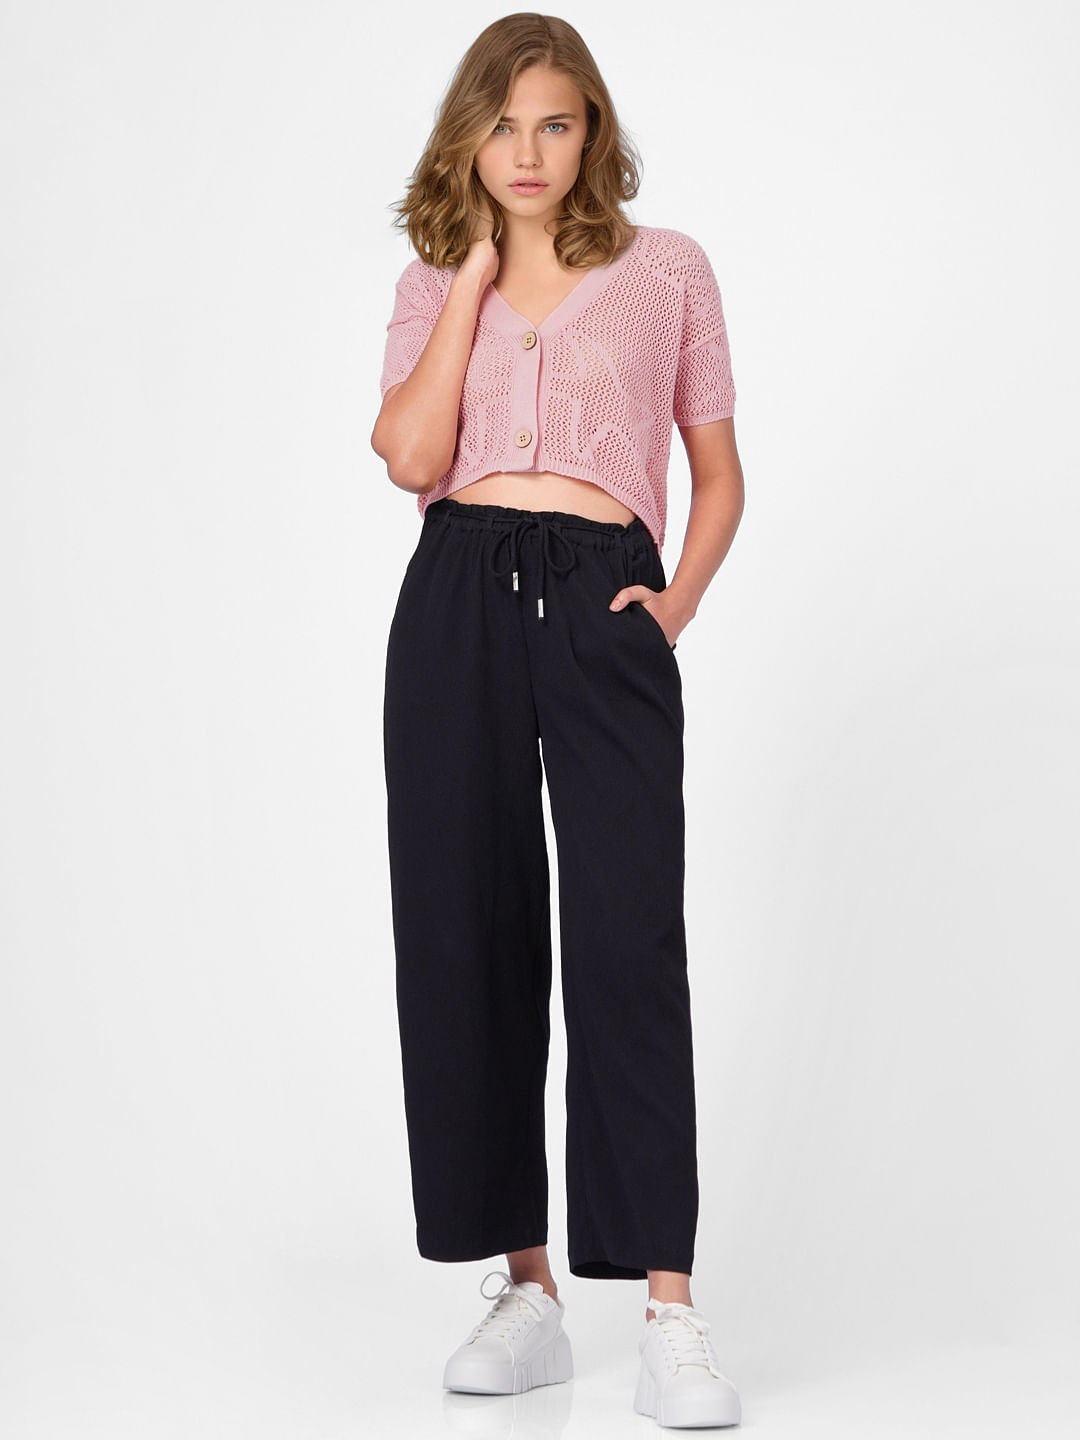 Solly Trousers & Leggings, Allen Solly Black Casual Pants for Women at  Allensolly.com